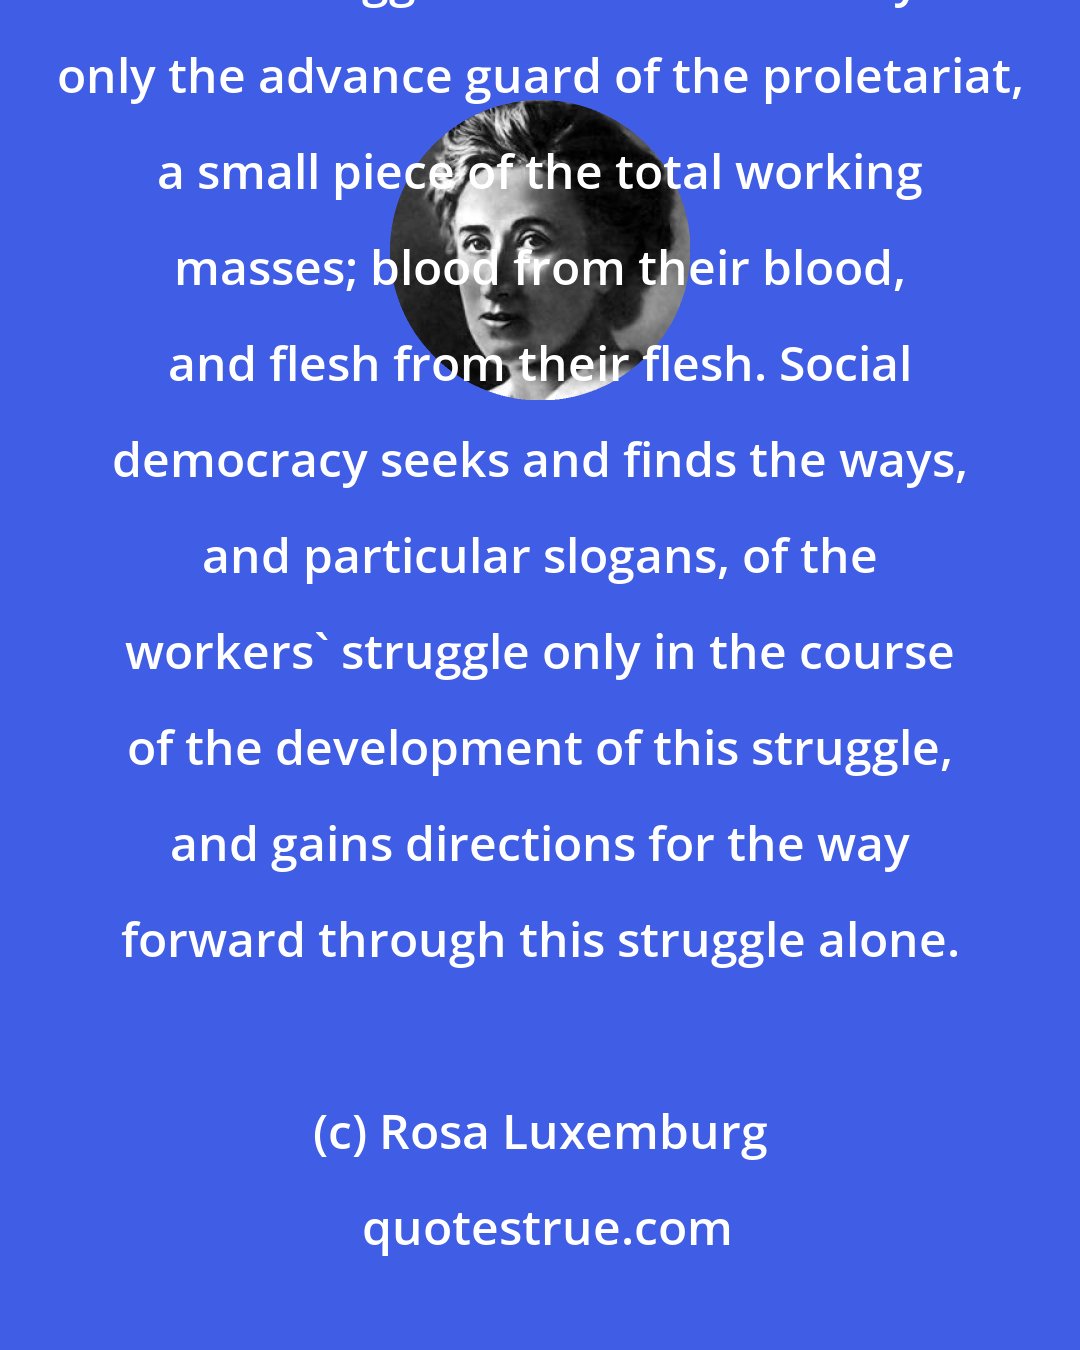 Rosa Luxemburg: The working classes in every country only learn to fight in the course of their struggles...Social democracy...is only the advance guard of the proletariat, a small piece of the total working masses; blood from their blood, and flesh from their flesh. Social democracy seeks and finds the ways, and particular slogans, of the workers' struggle only in the course of the development of this struggle, and gains directions for the way forward through this struggle alone.